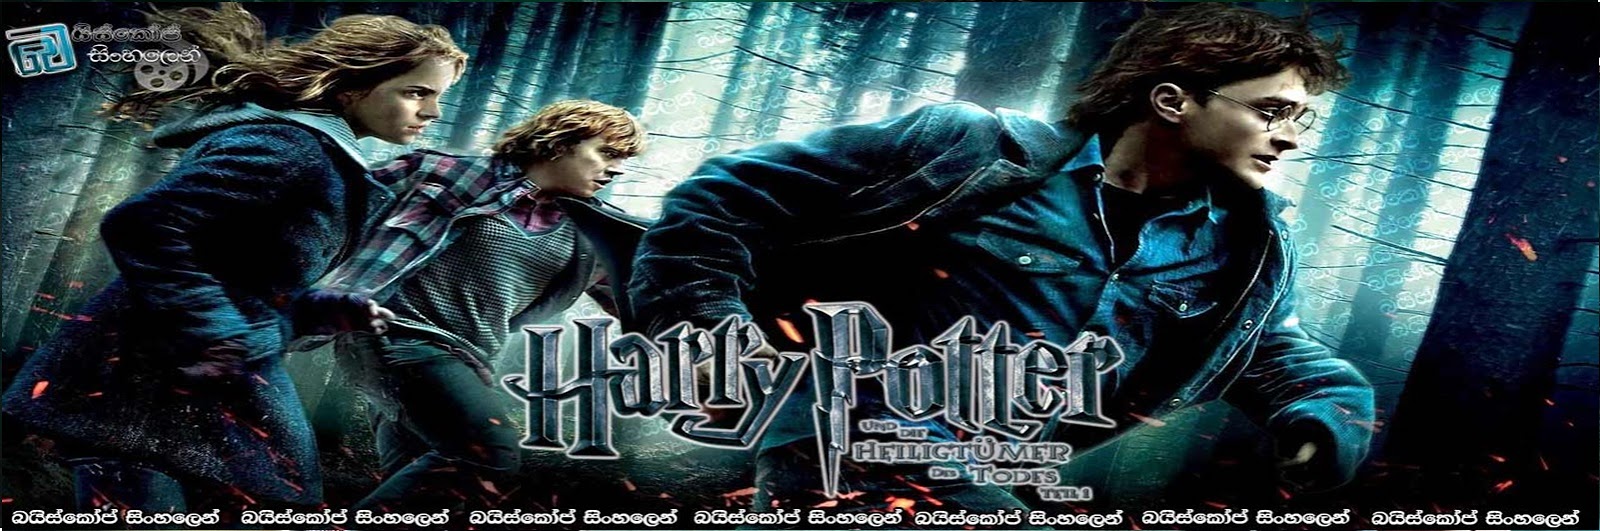 harry potter deathly hallows part 2 in hindi free download